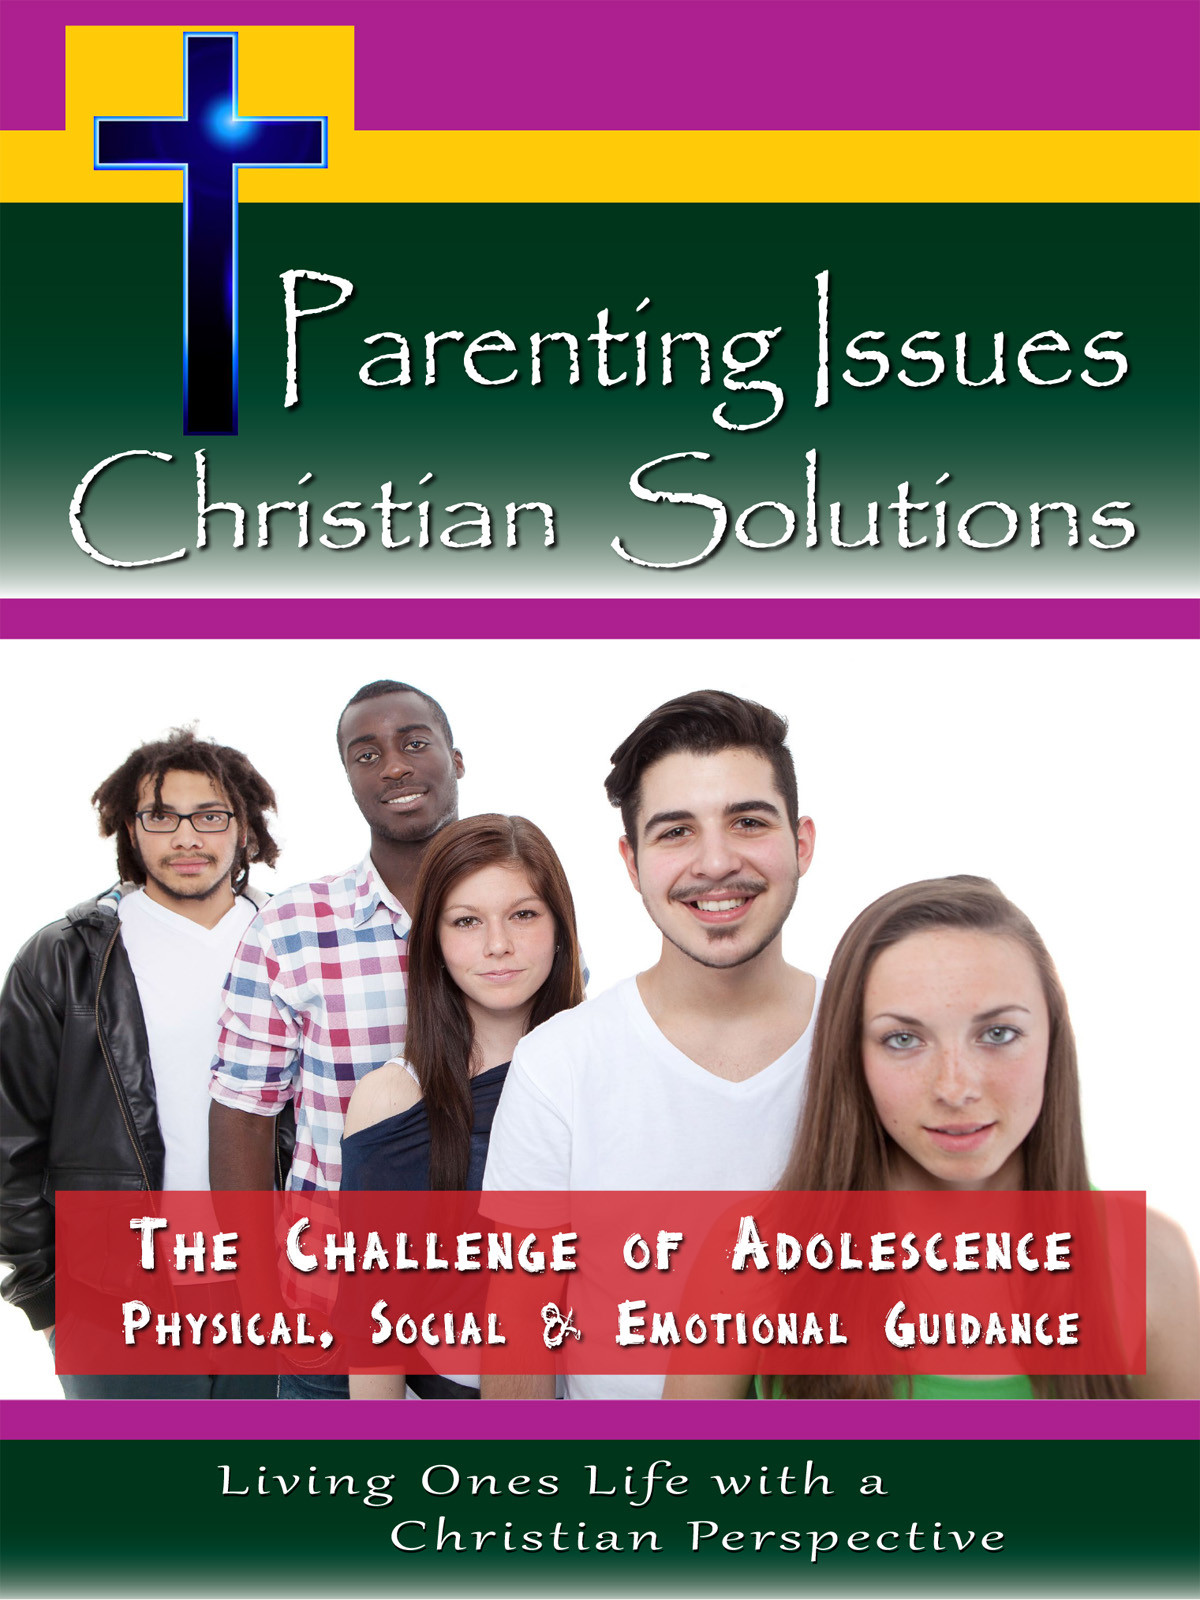 CH10001 - The Challenge of Adolescence Physical, Social & Emotional Guidance